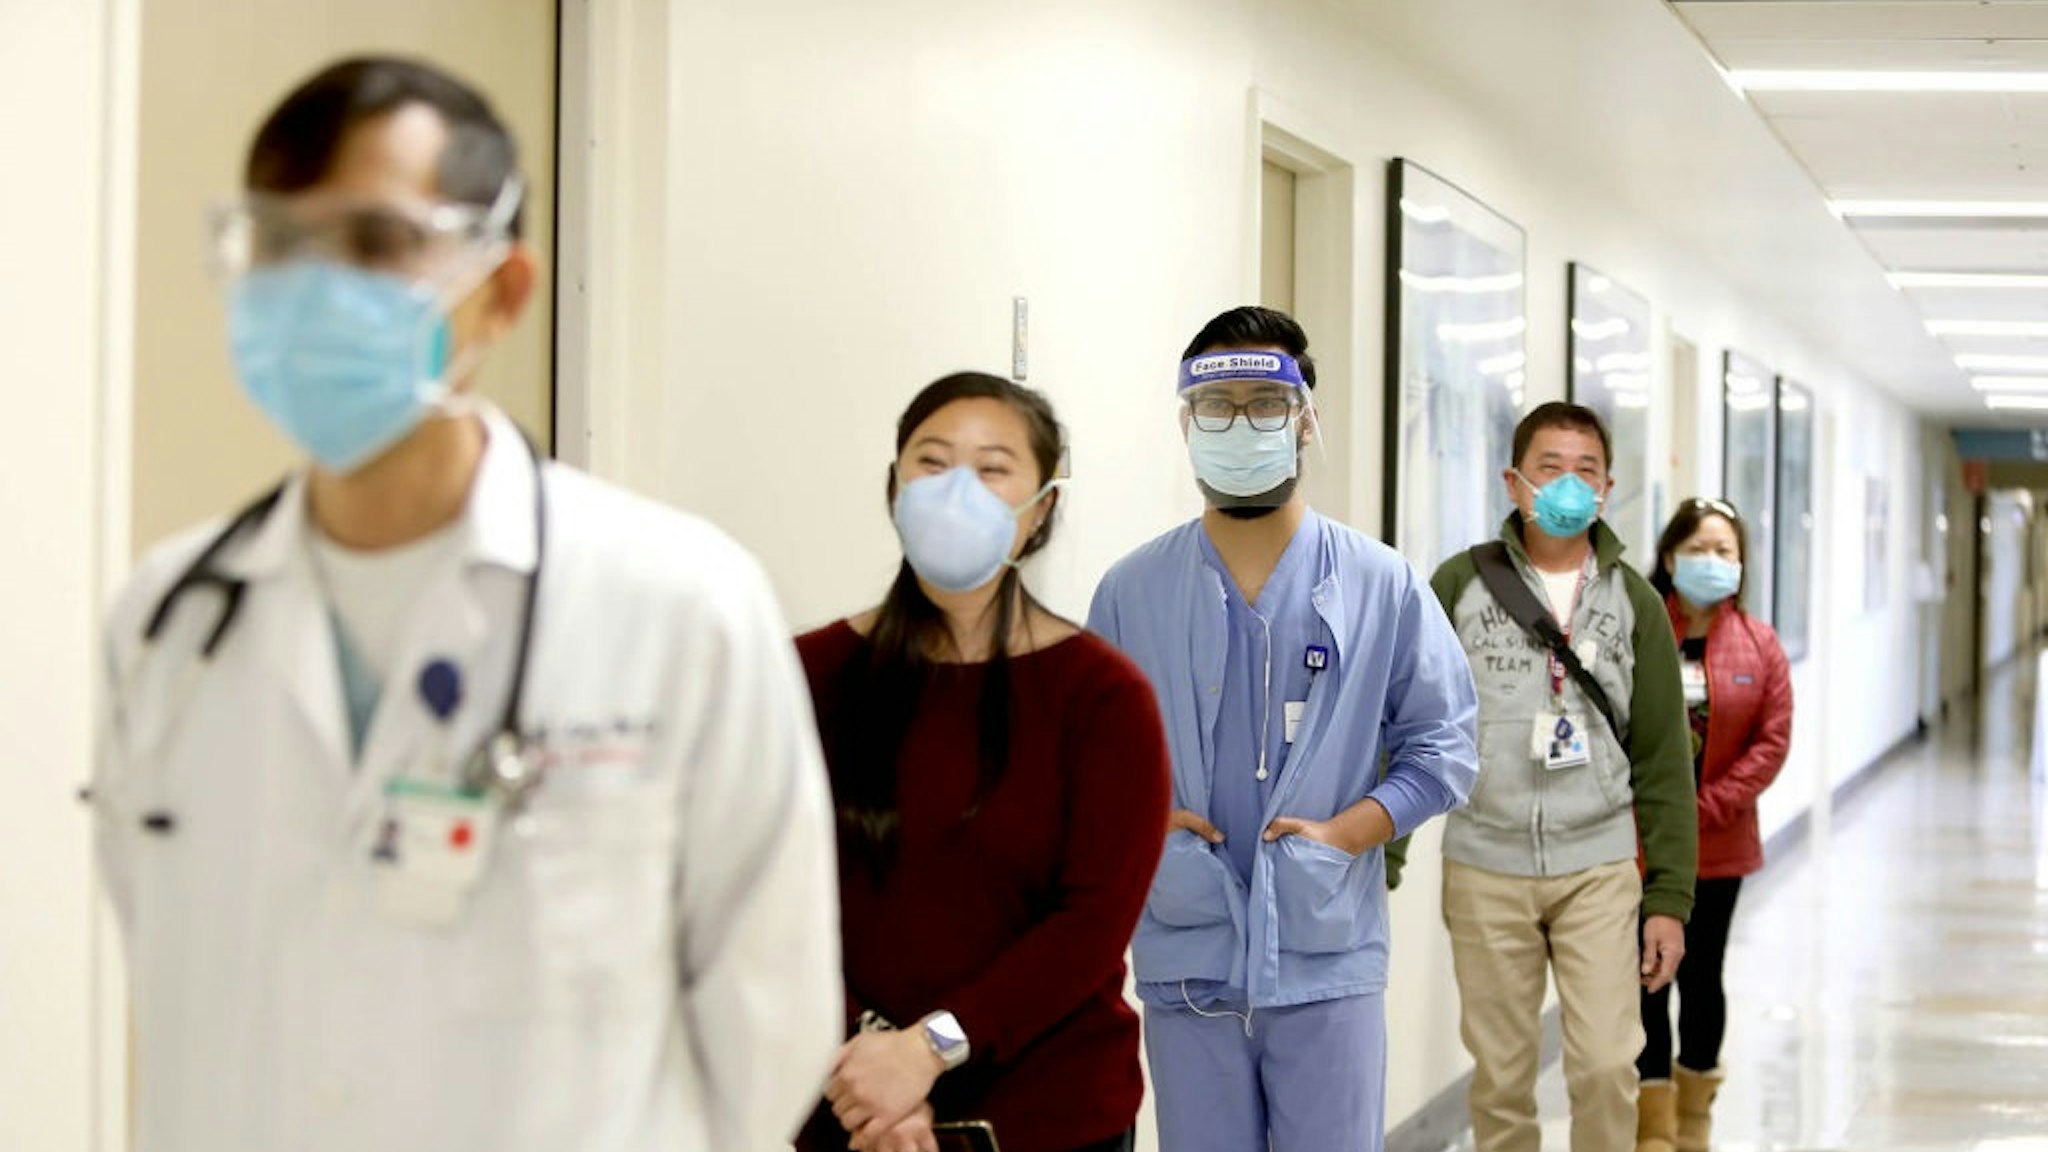 DALY CITY, CA - DEC. 21: Donning a mask and face shield, Roman Romo, center, waits in line with other staff members to receive a coronavirus vaccine at Seton Medical Center on Monday, December 21, 2020, in Daly City, California.